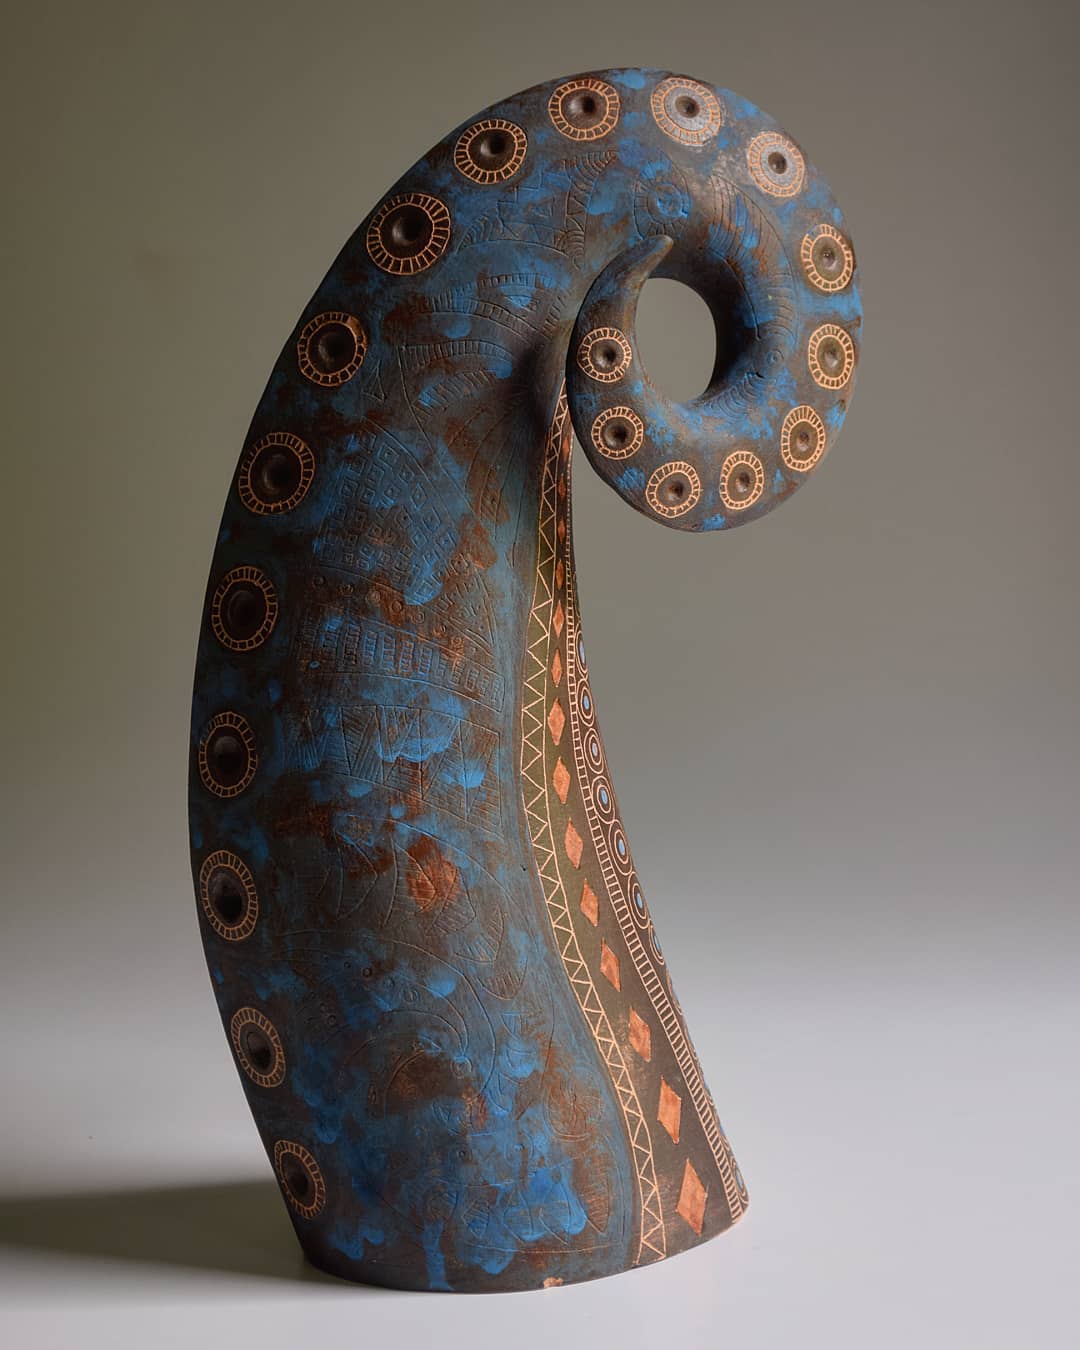 Abstract Figurative Ceramic Sculptures By Carlos Cabo (2)